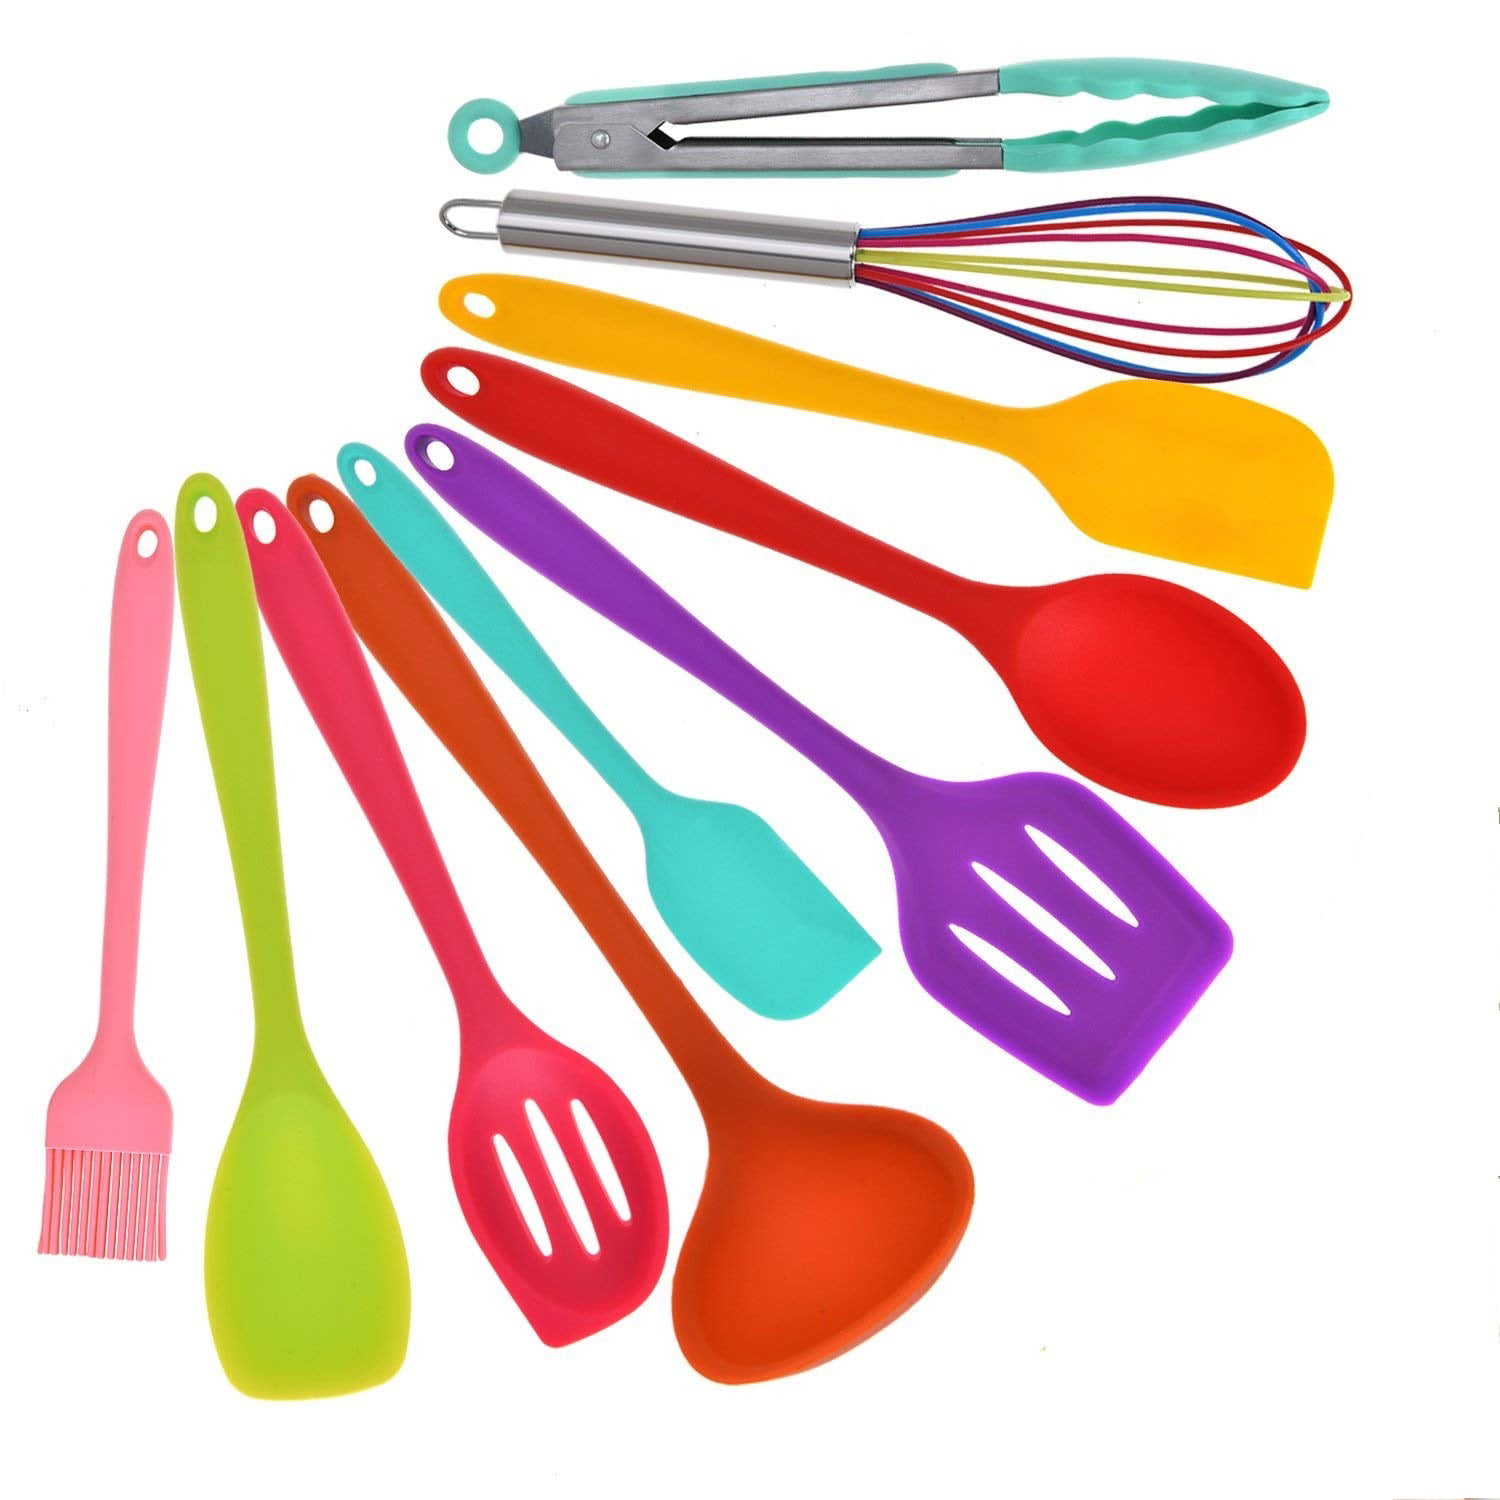 Silicone Kitchen Utensil Set 10 Pieces Colorful Cooking Utensils